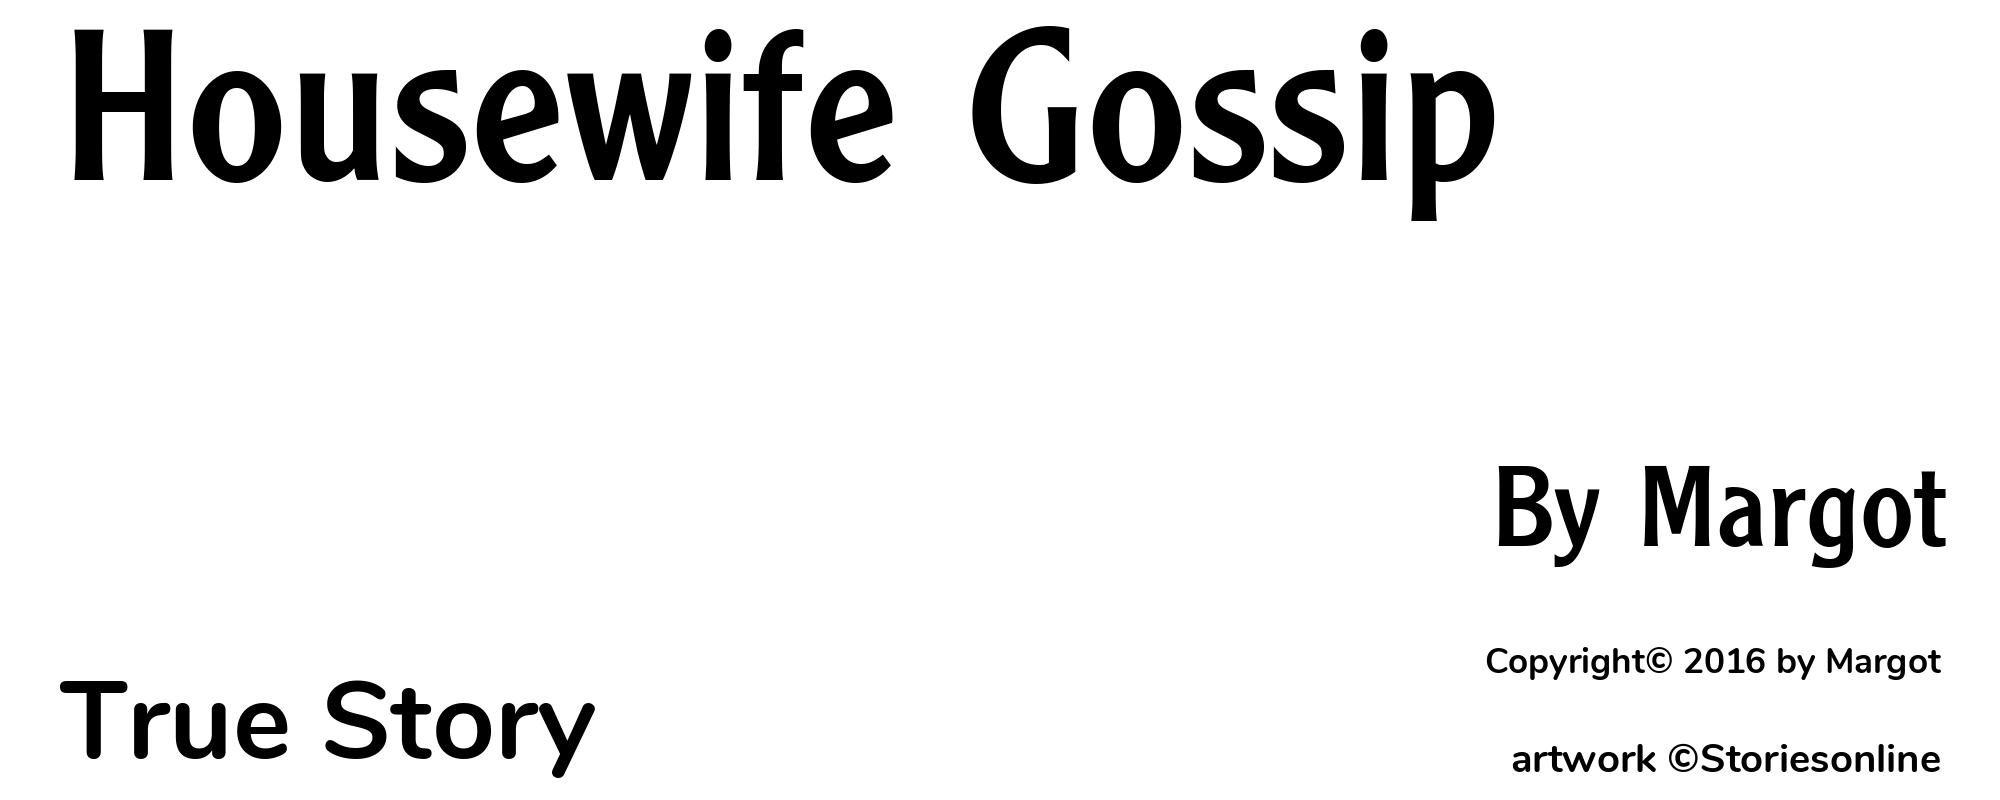 Housewife Gossip - Cover